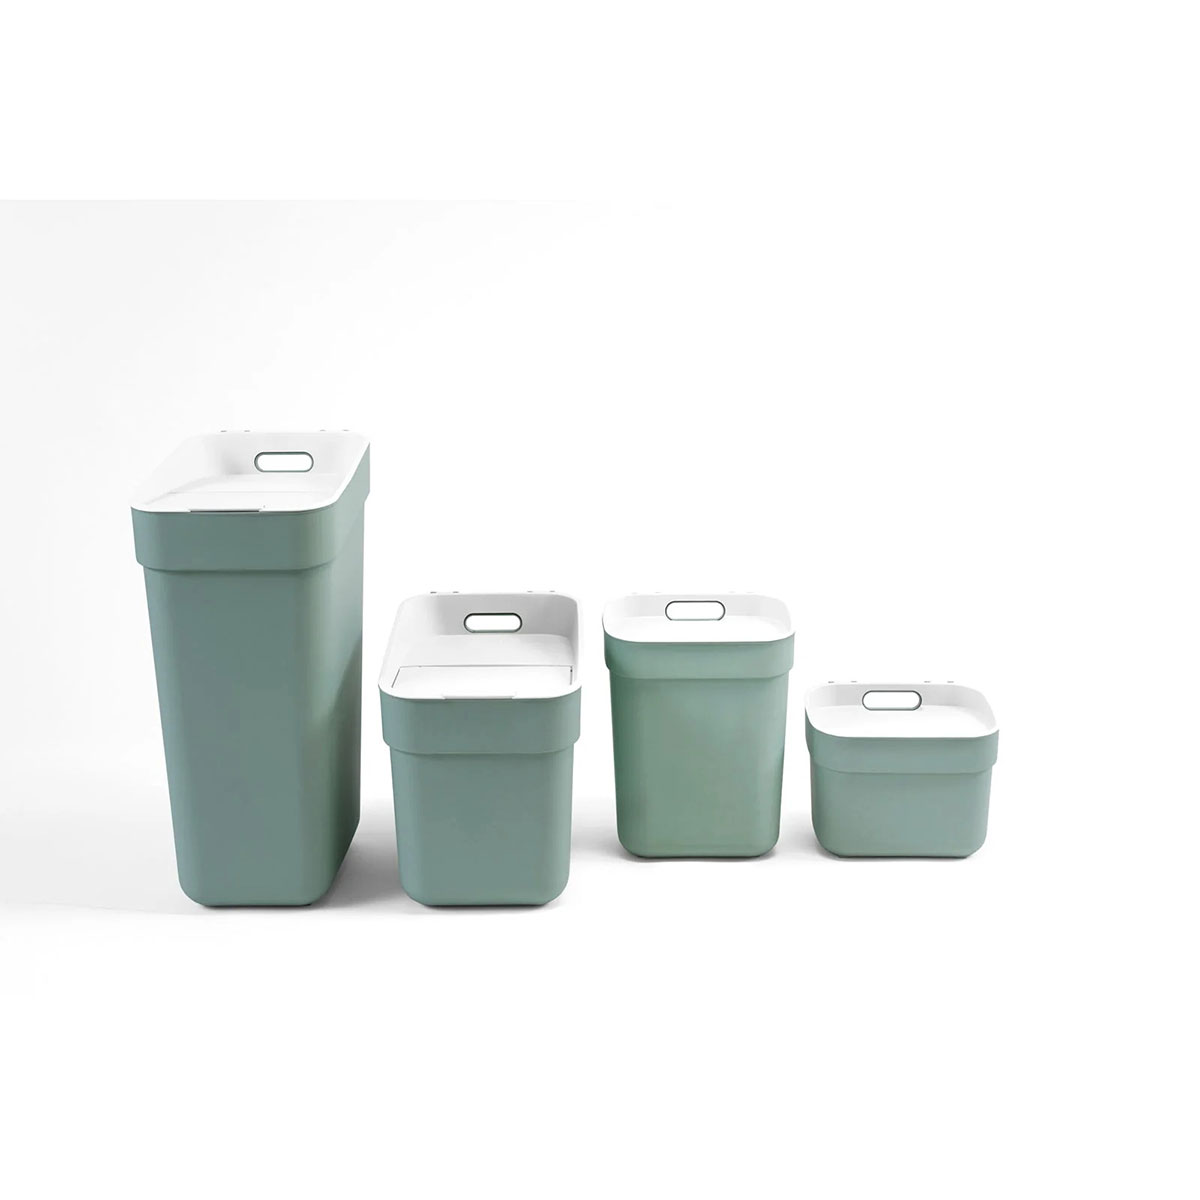 Ready To Collect Waste Separation 4 Pack – Green